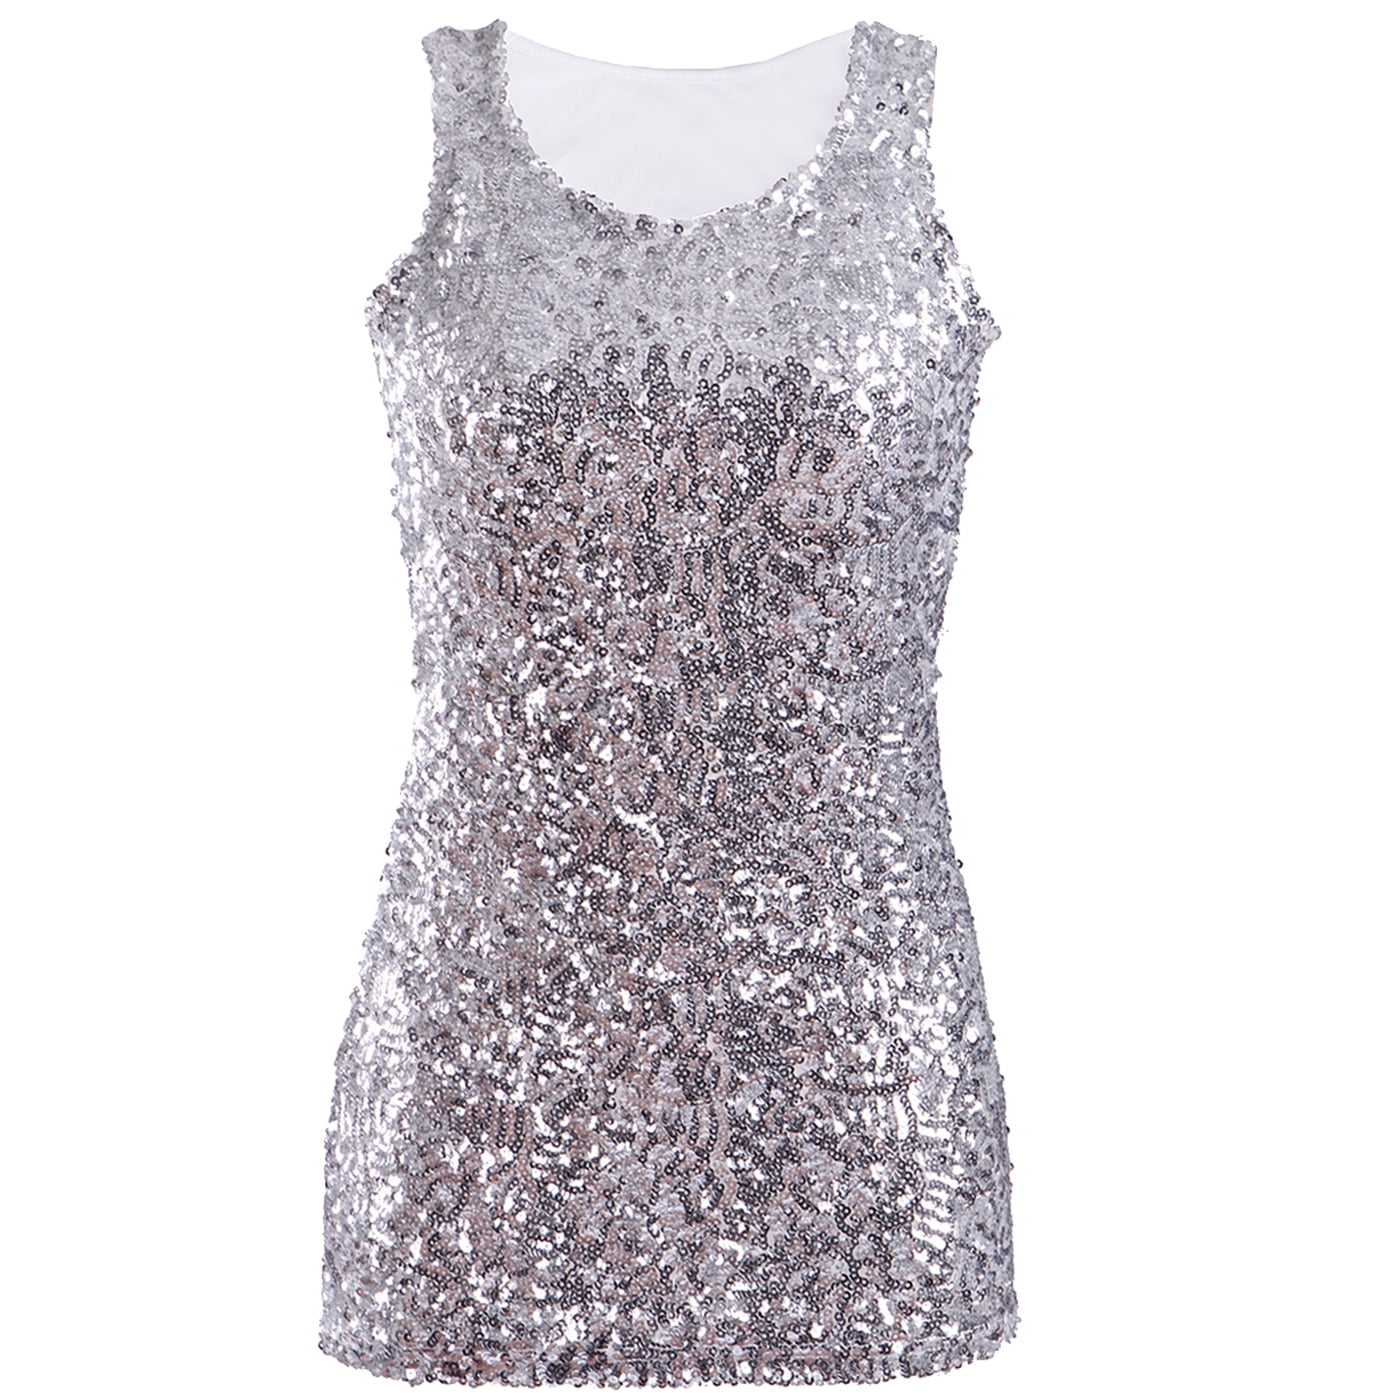 HDE - HDE Women's Shiny Sequin Tank Top Embellished Sparkly Sleeveless ...